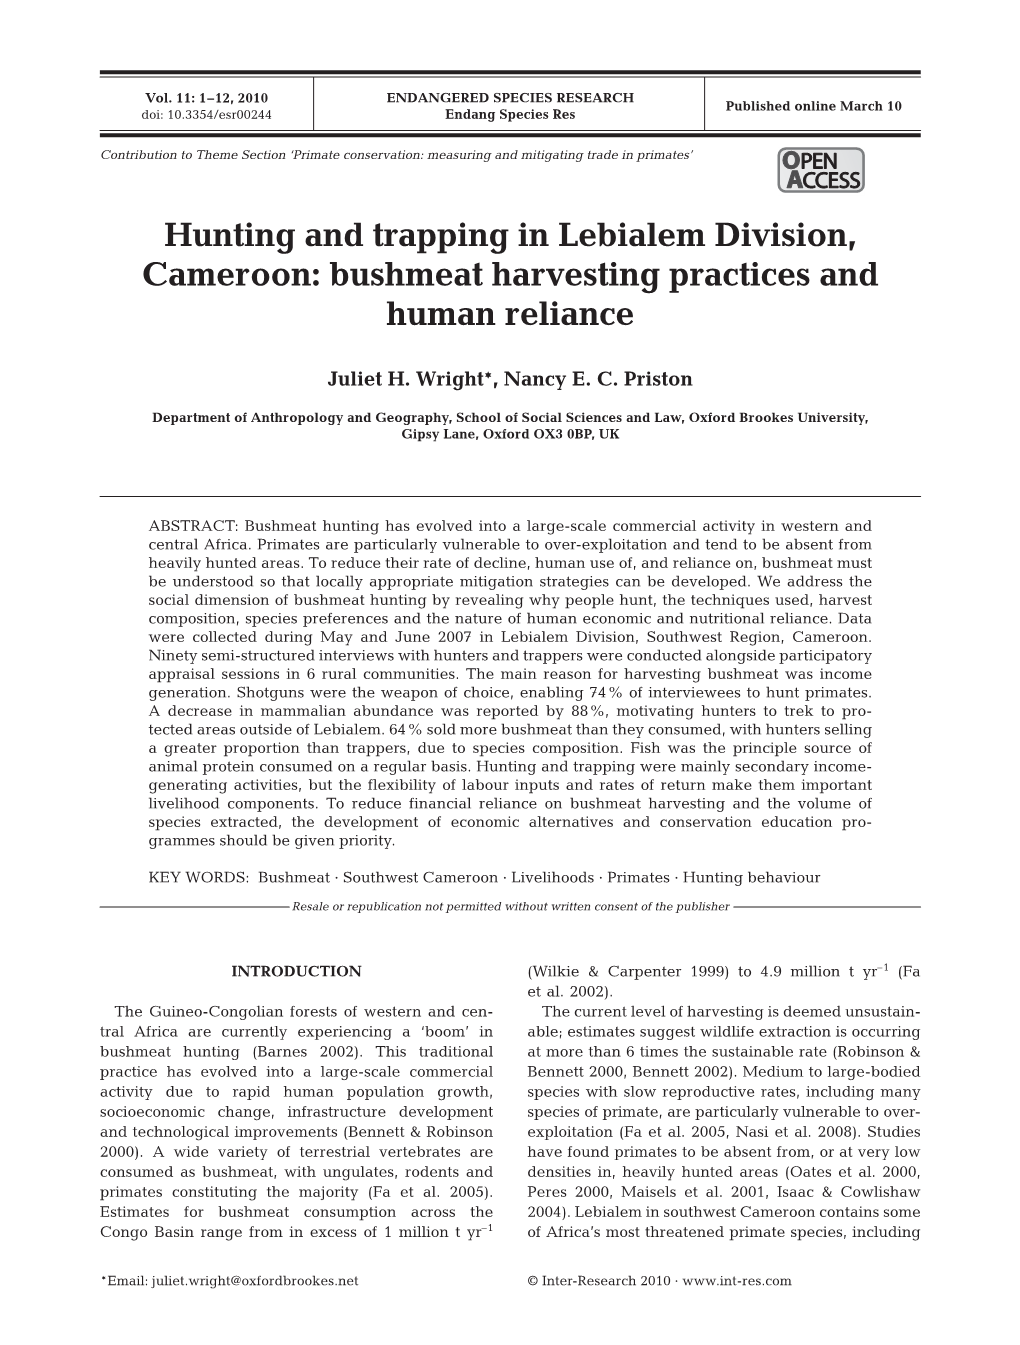 Hunting and Trapping in Lebialem Division, Cameroon: Bushmeat Harvesting Practices and Human Reliance